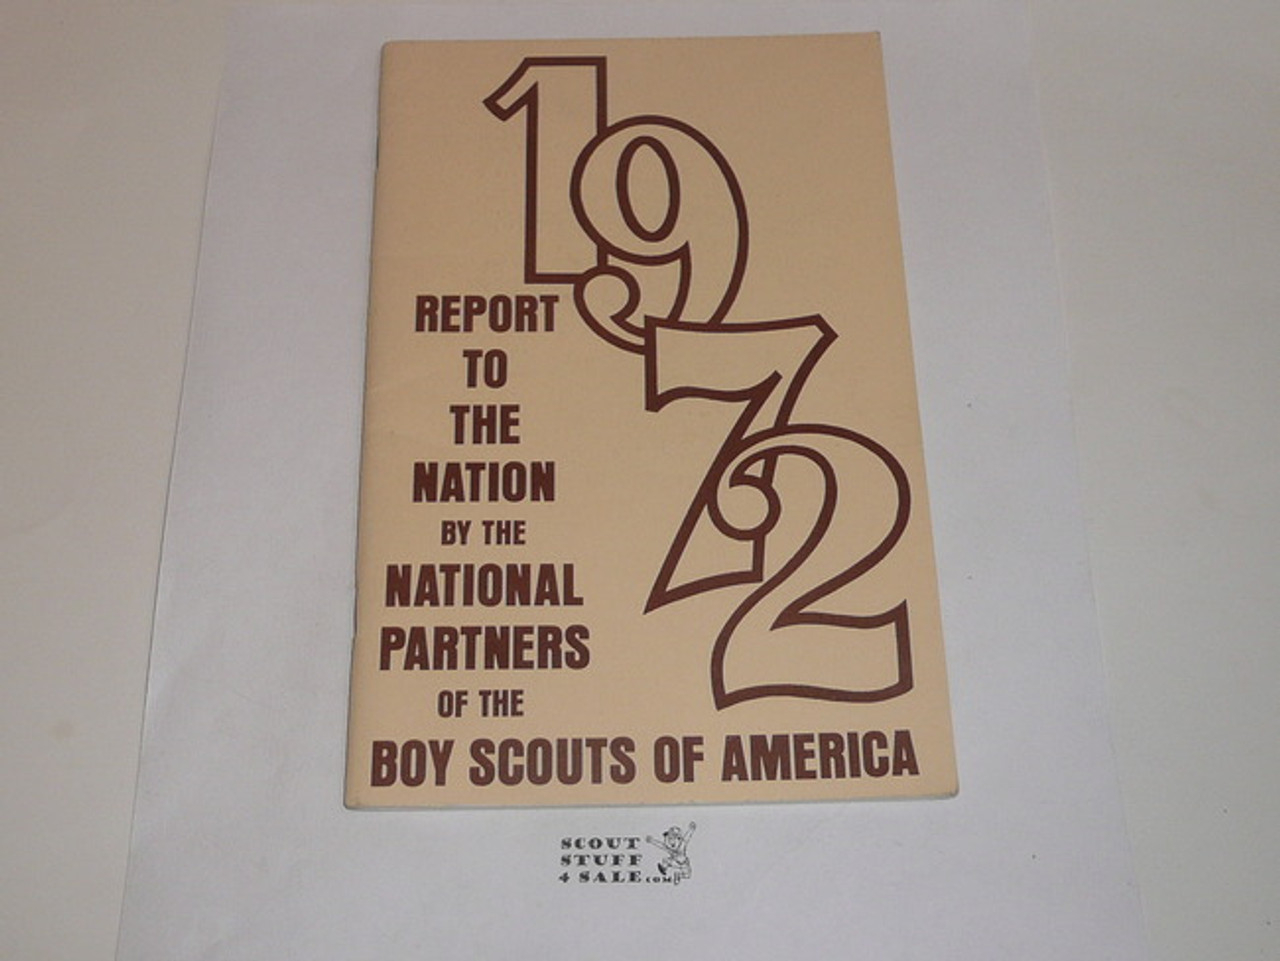 1972 Report to the Nation by the National Partners of the Boy Scouts of America